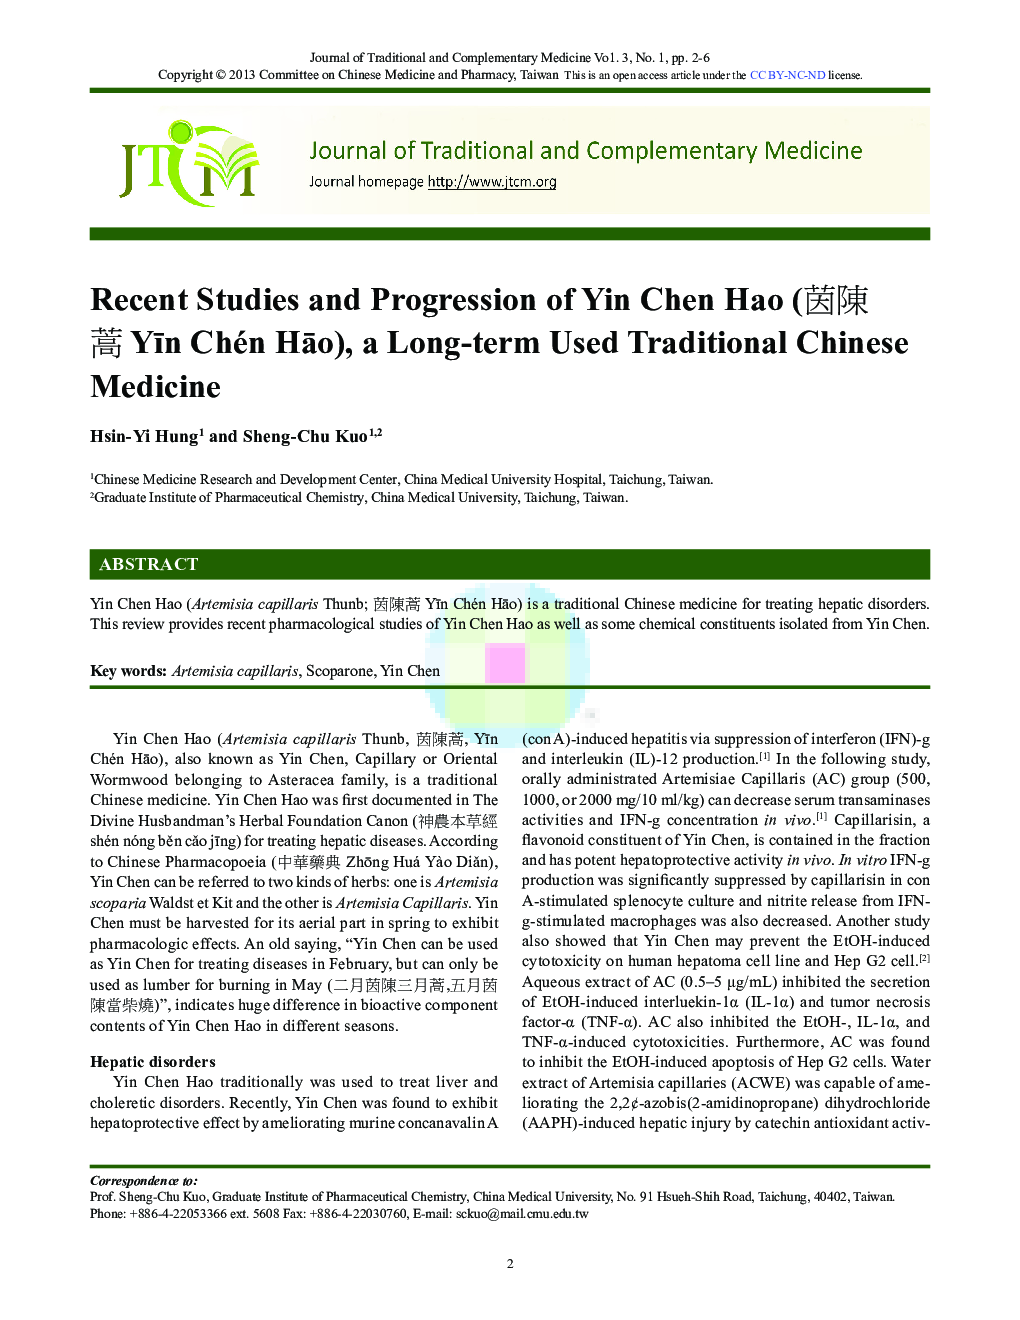 Recent Studies and Progression of Yin Chen Hao (茵陳蒿 Yīn Chén Hāo), a Long-term Used Traditional Chinese Medicine